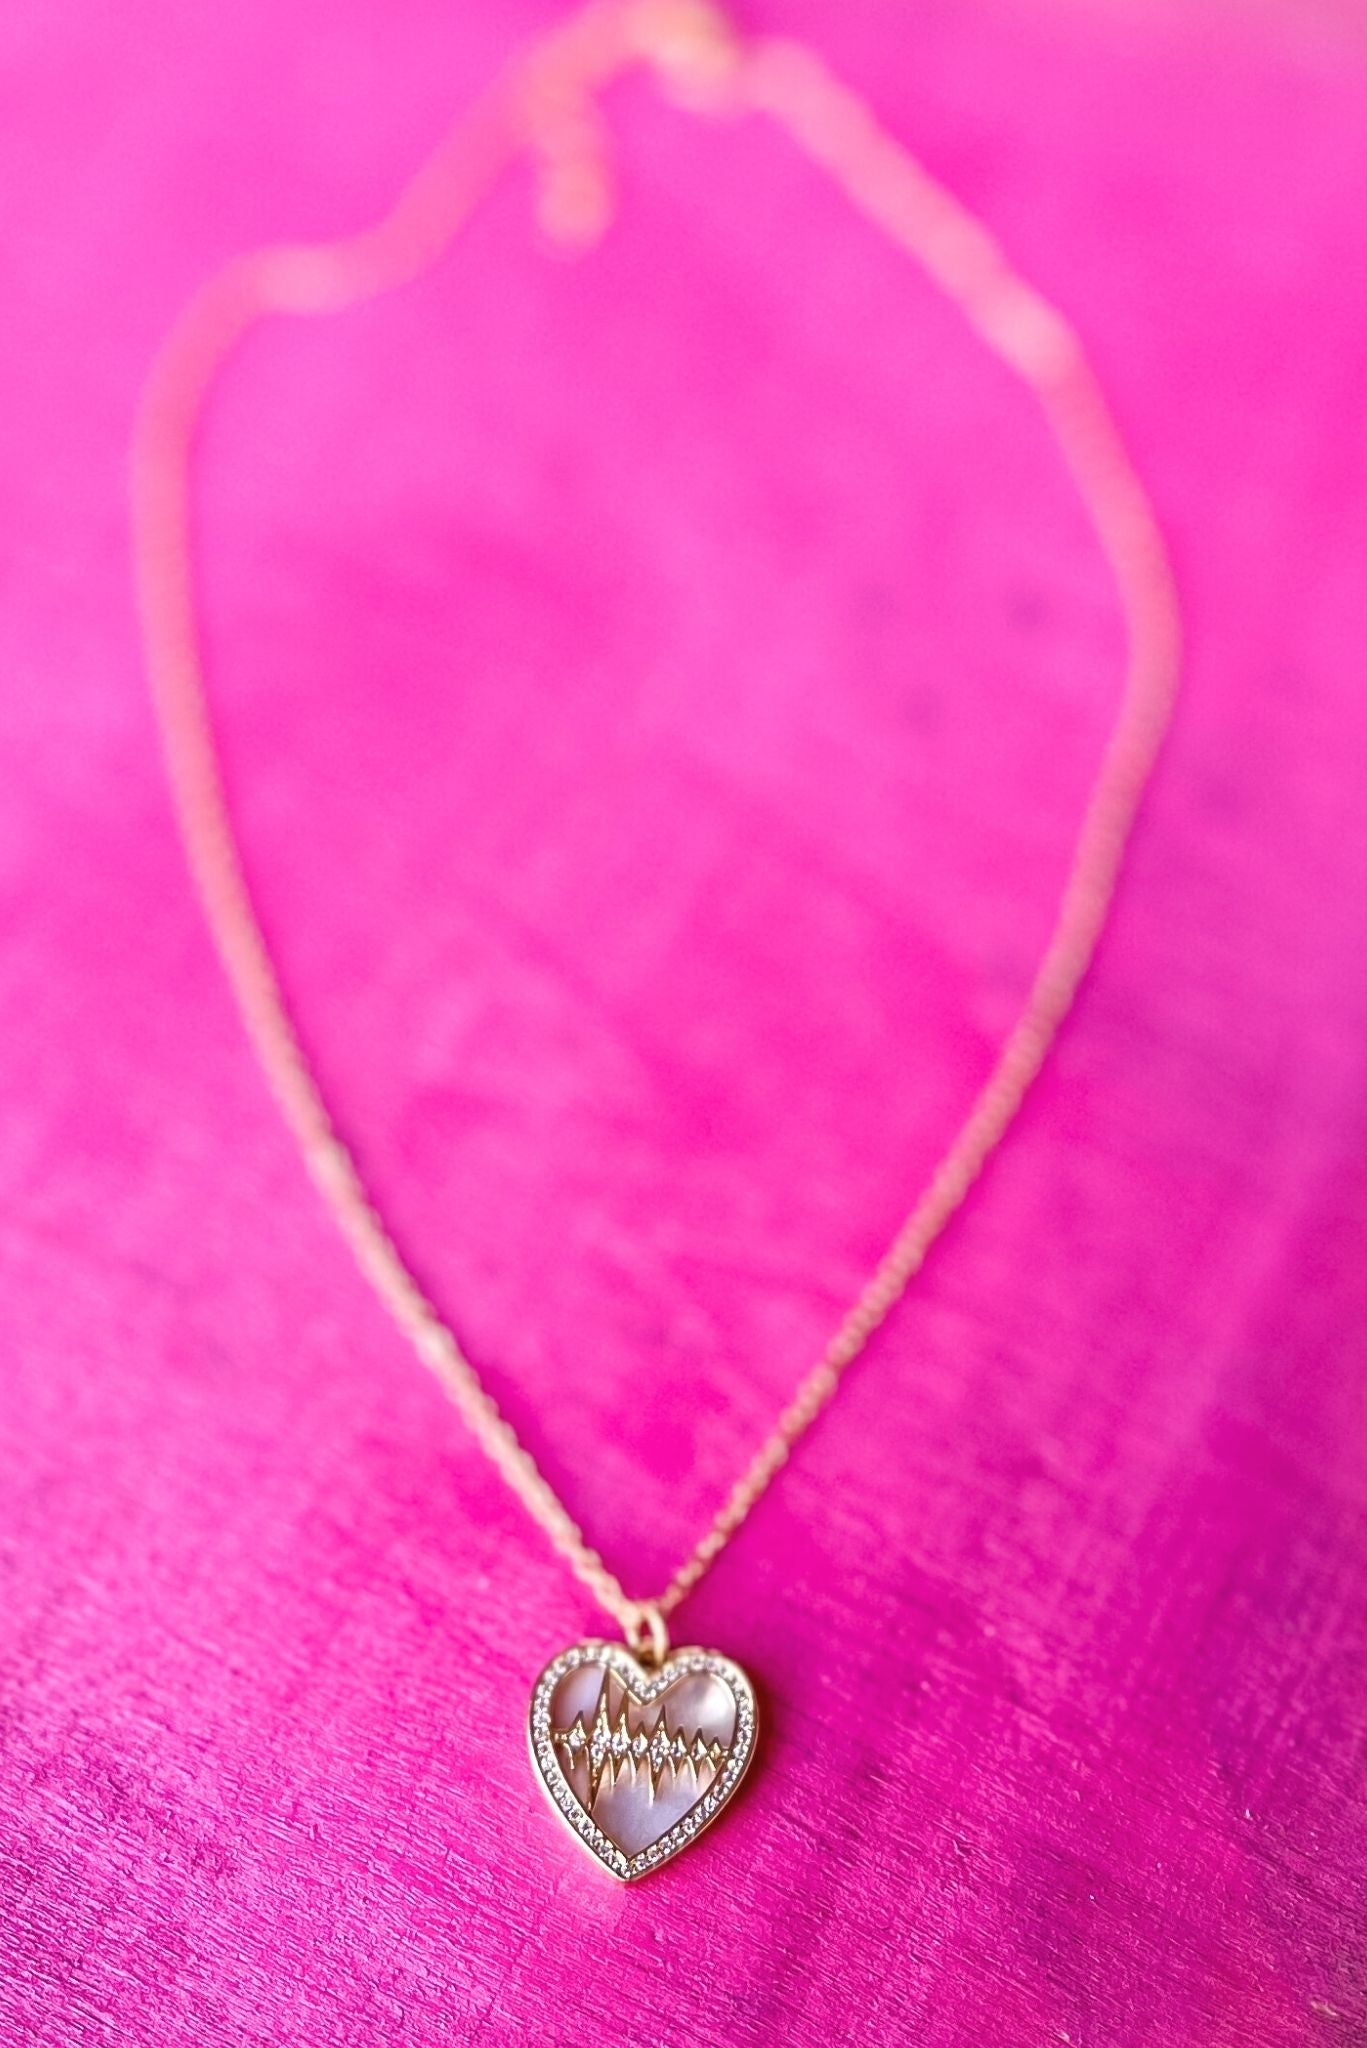 SSYS Gold Heartbeat Pearlescent Rounded Heart Dainty Necklace